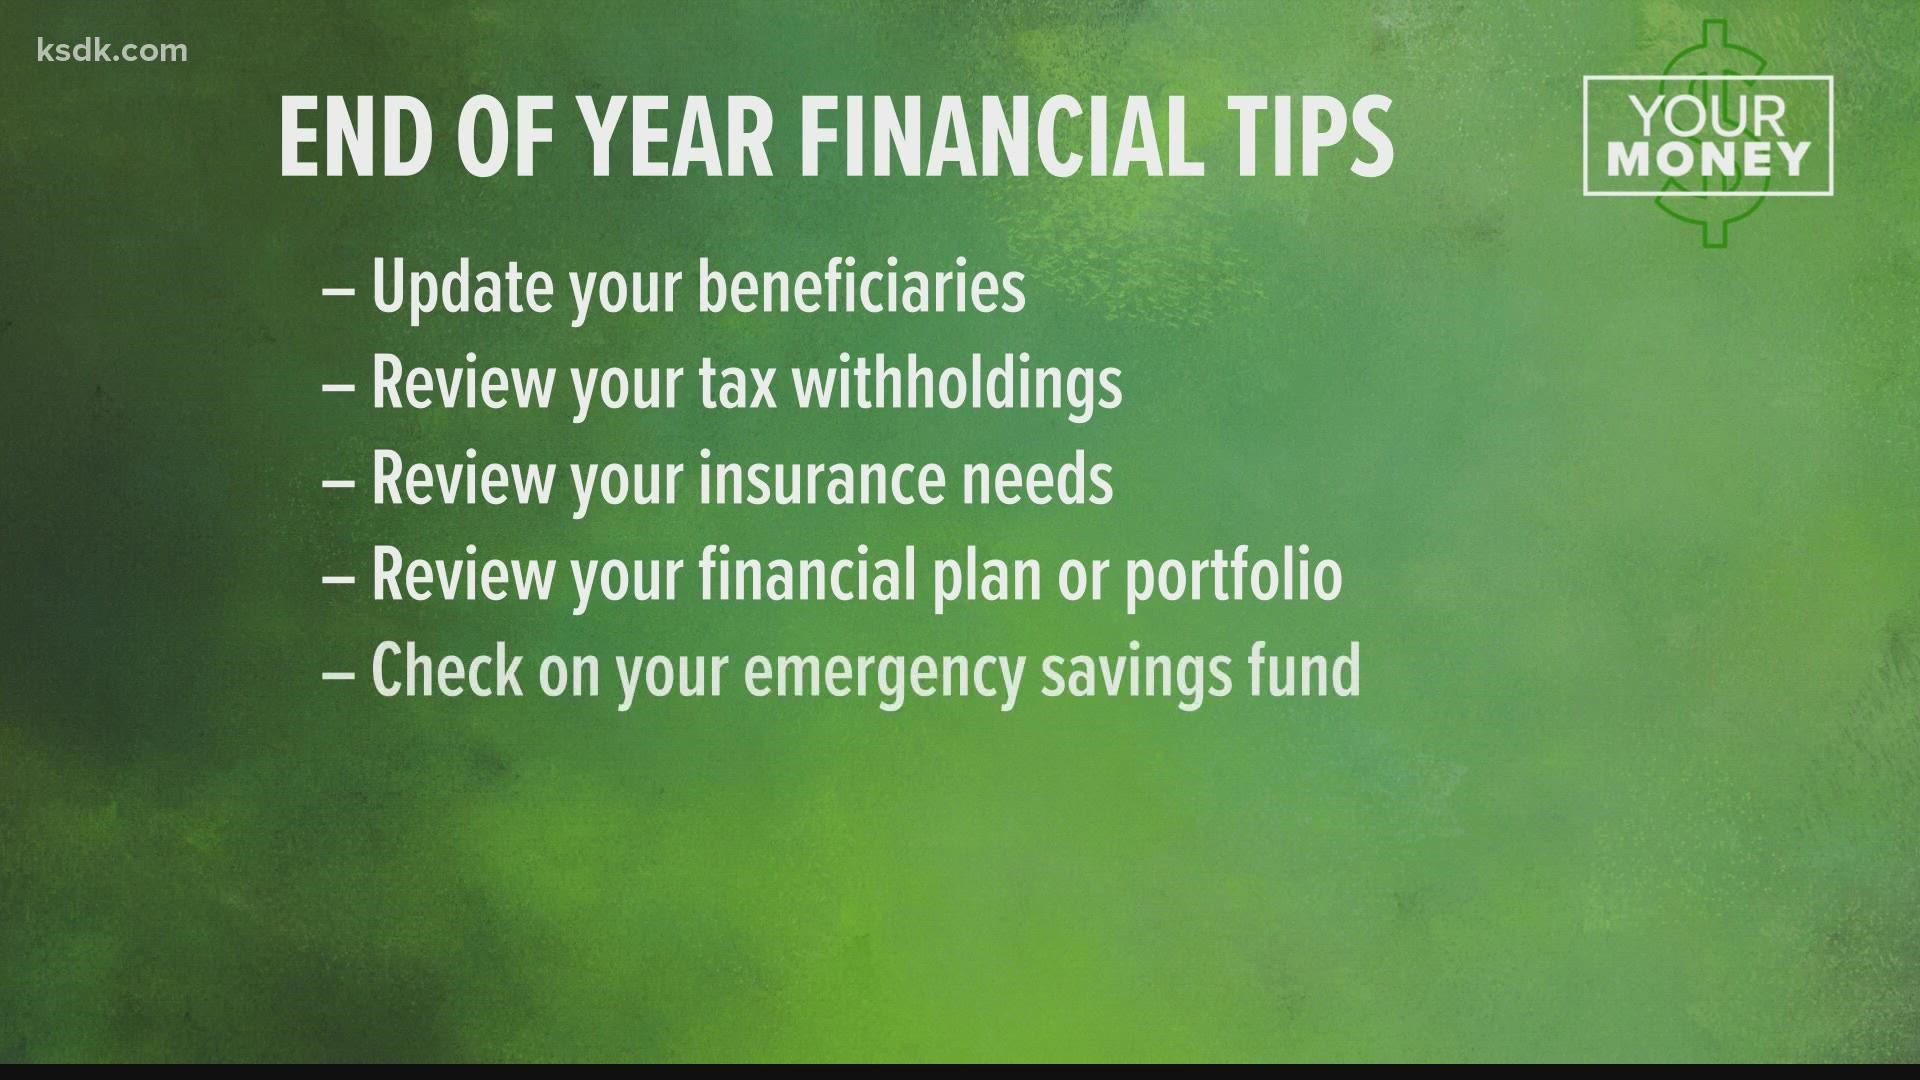 The end of the year is upon us, and there are ways to make your money work for you from tax prep to changing your insurance.